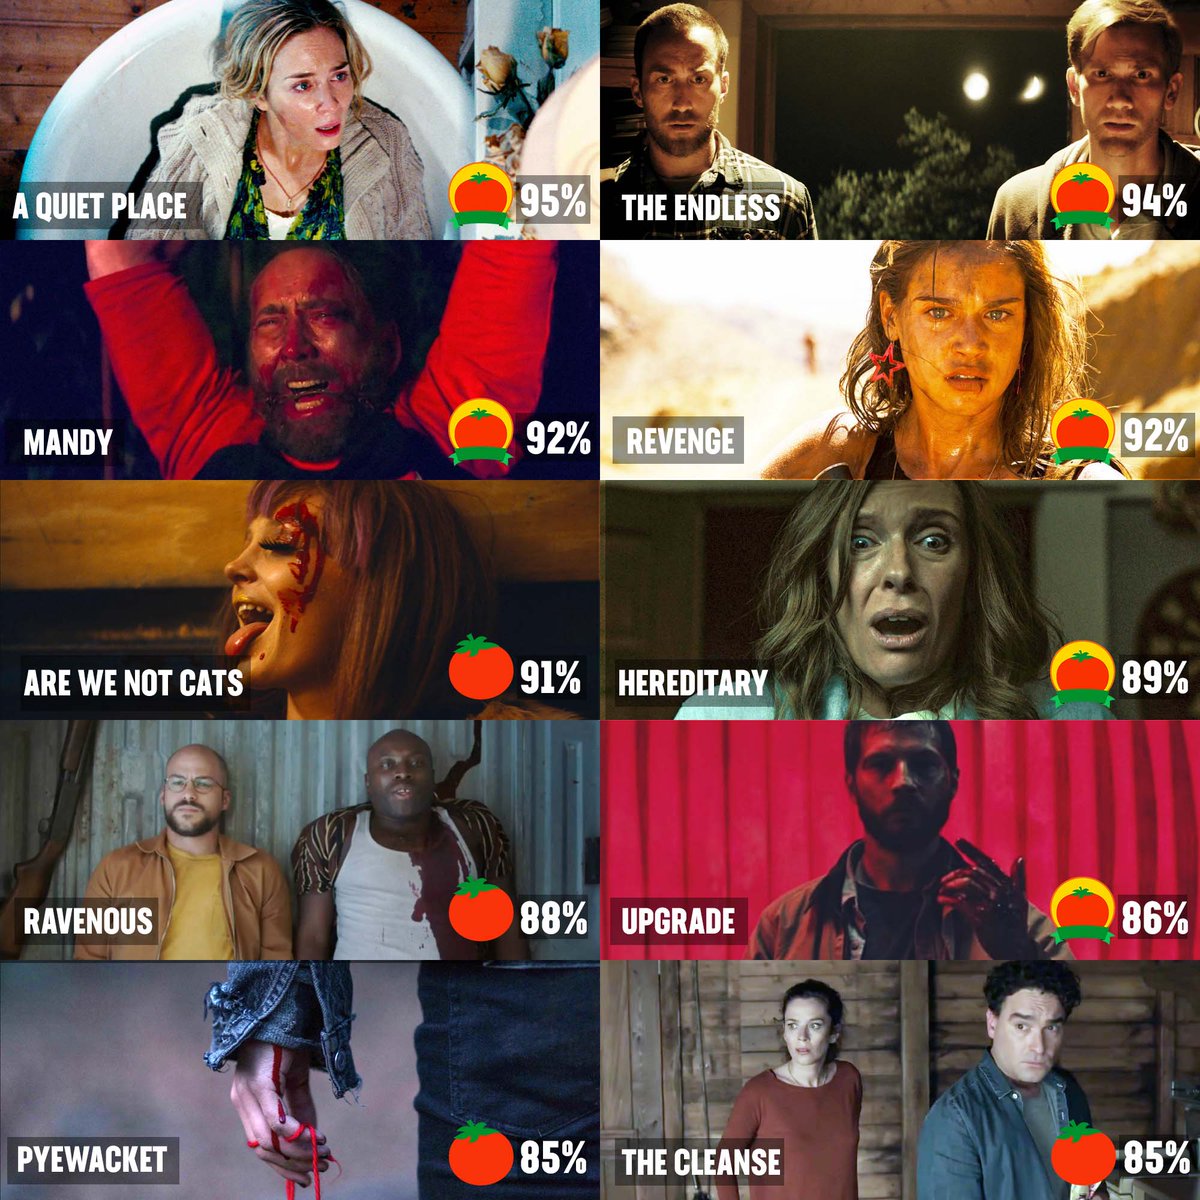 Maxim Martin Luther King Junior Sui Rotten Tomatoes on Twitter: "The top horror movies of the year by  #Tomatometer. Which is your favorite? https://t.co/0XlSdLZdUT  https://t.co/cqN9noymSB" / Twitter